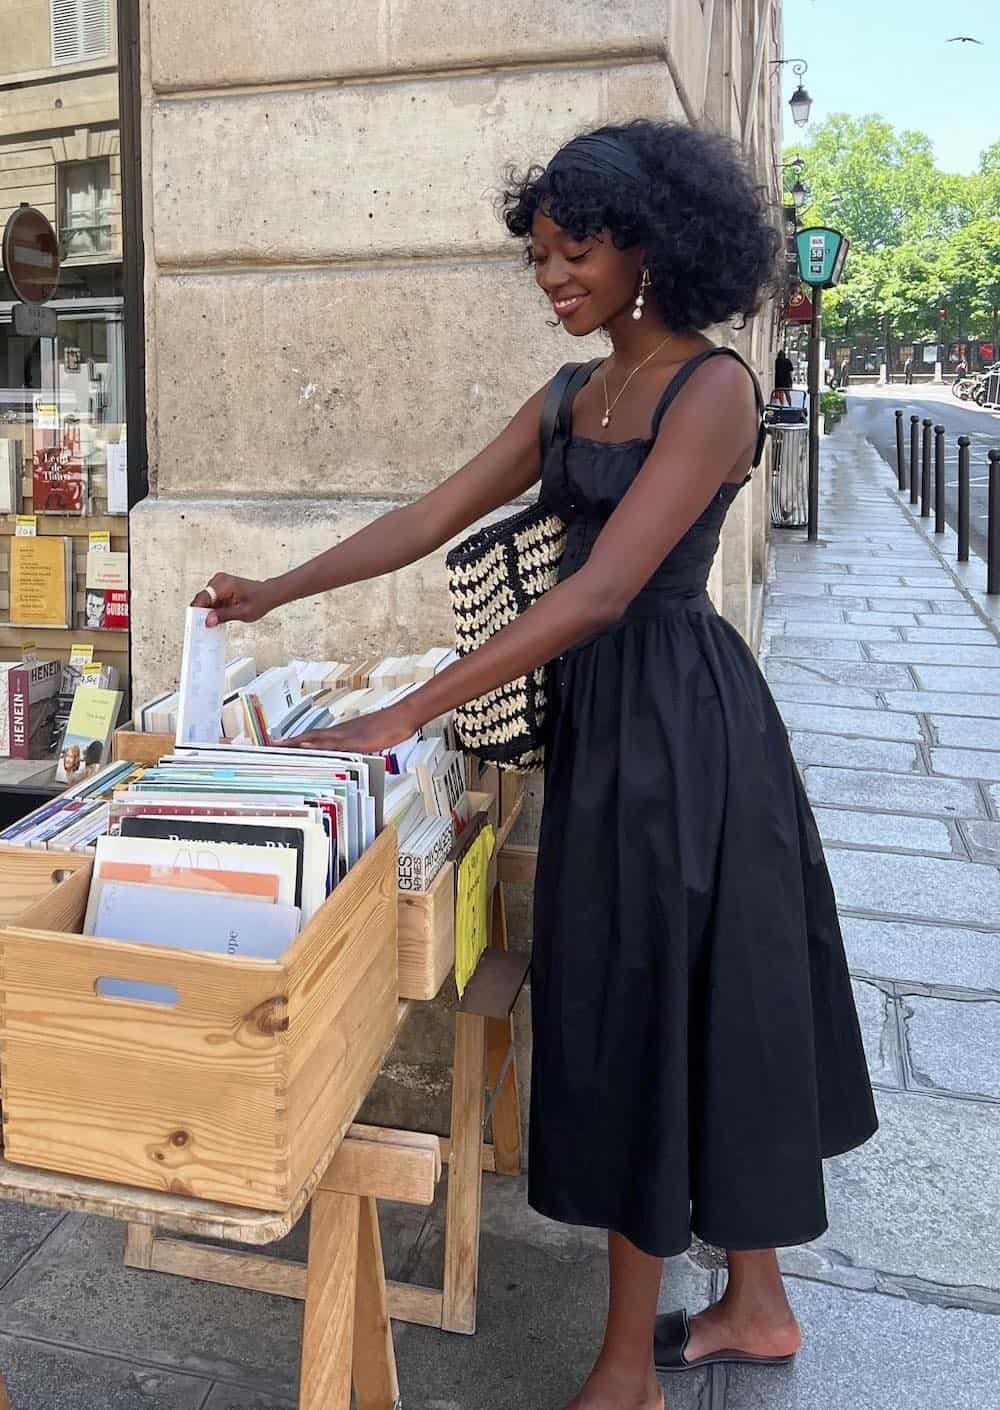 Woman wearing a black sundress with black sandals while attending an outdoor market.